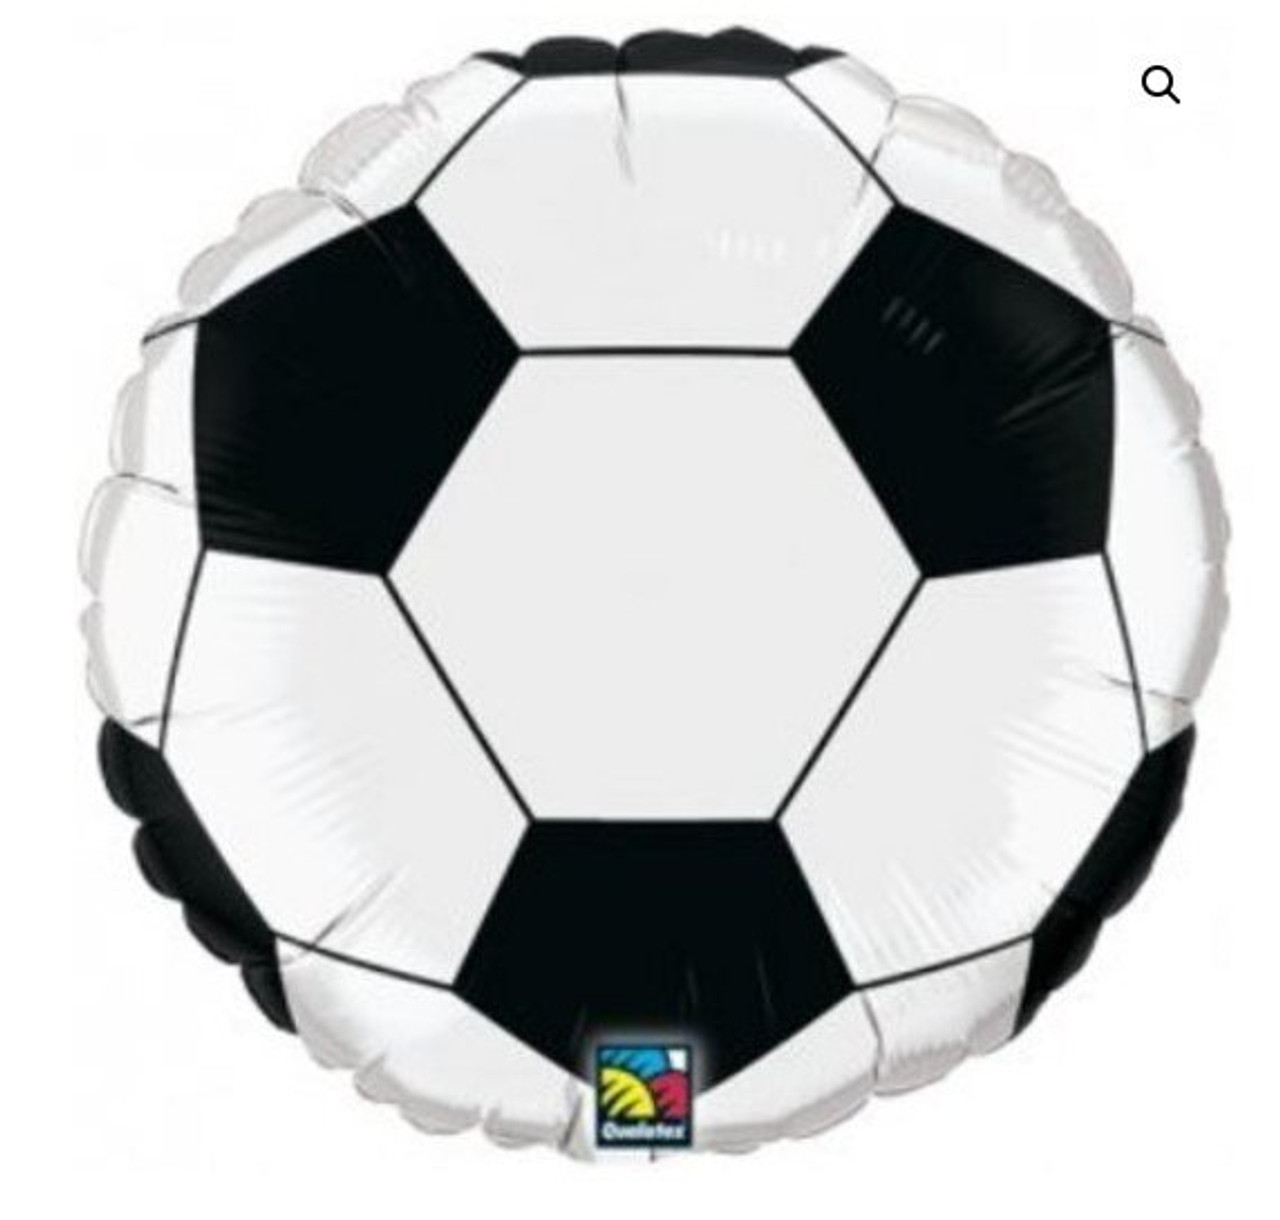 A11704001-1  SOCCER BALL FOIL BALLOON  45cm -  HELIUM INFLATED & RIBBON